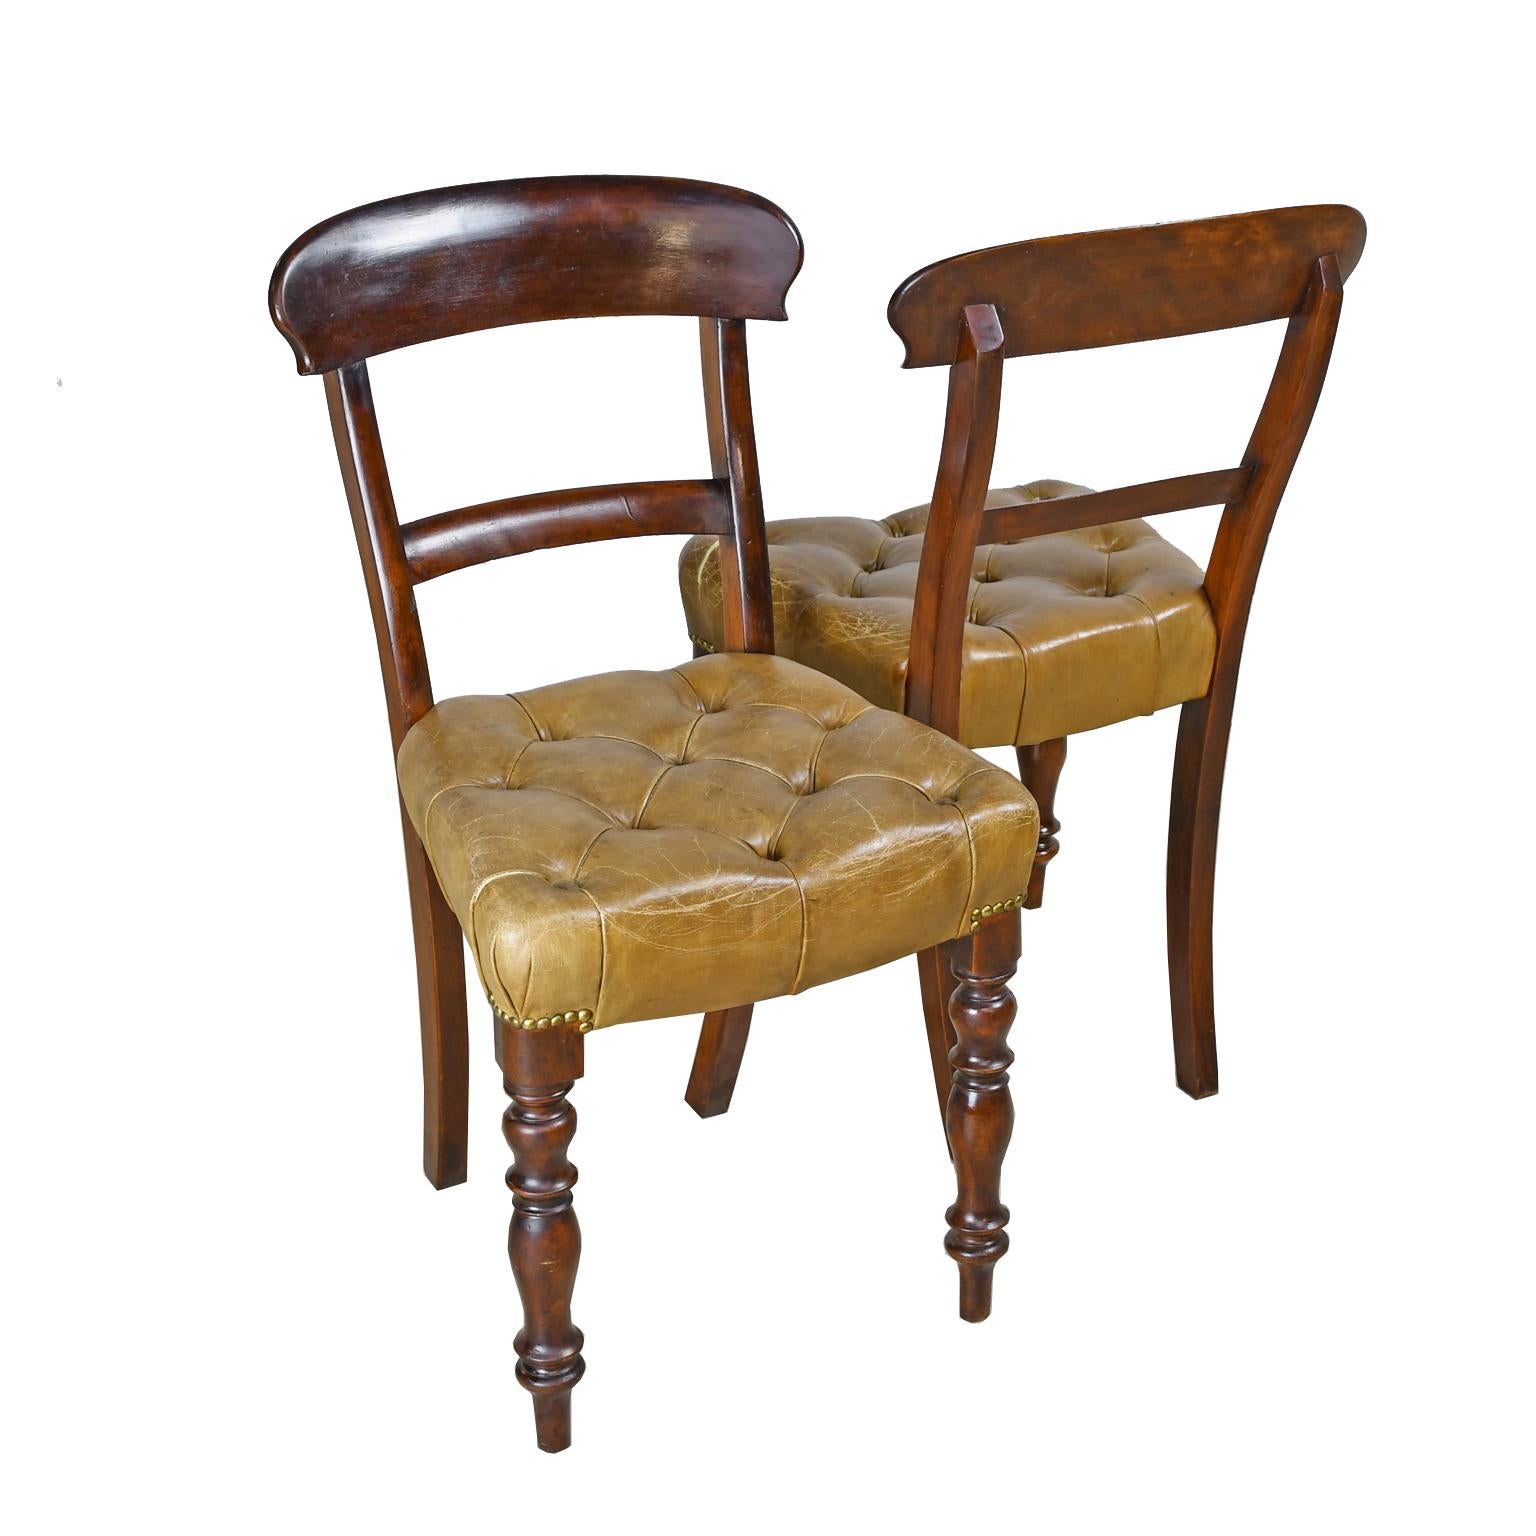 Pair of Early Victorian Mahogany Chairs with Leather Upholstery, England 7